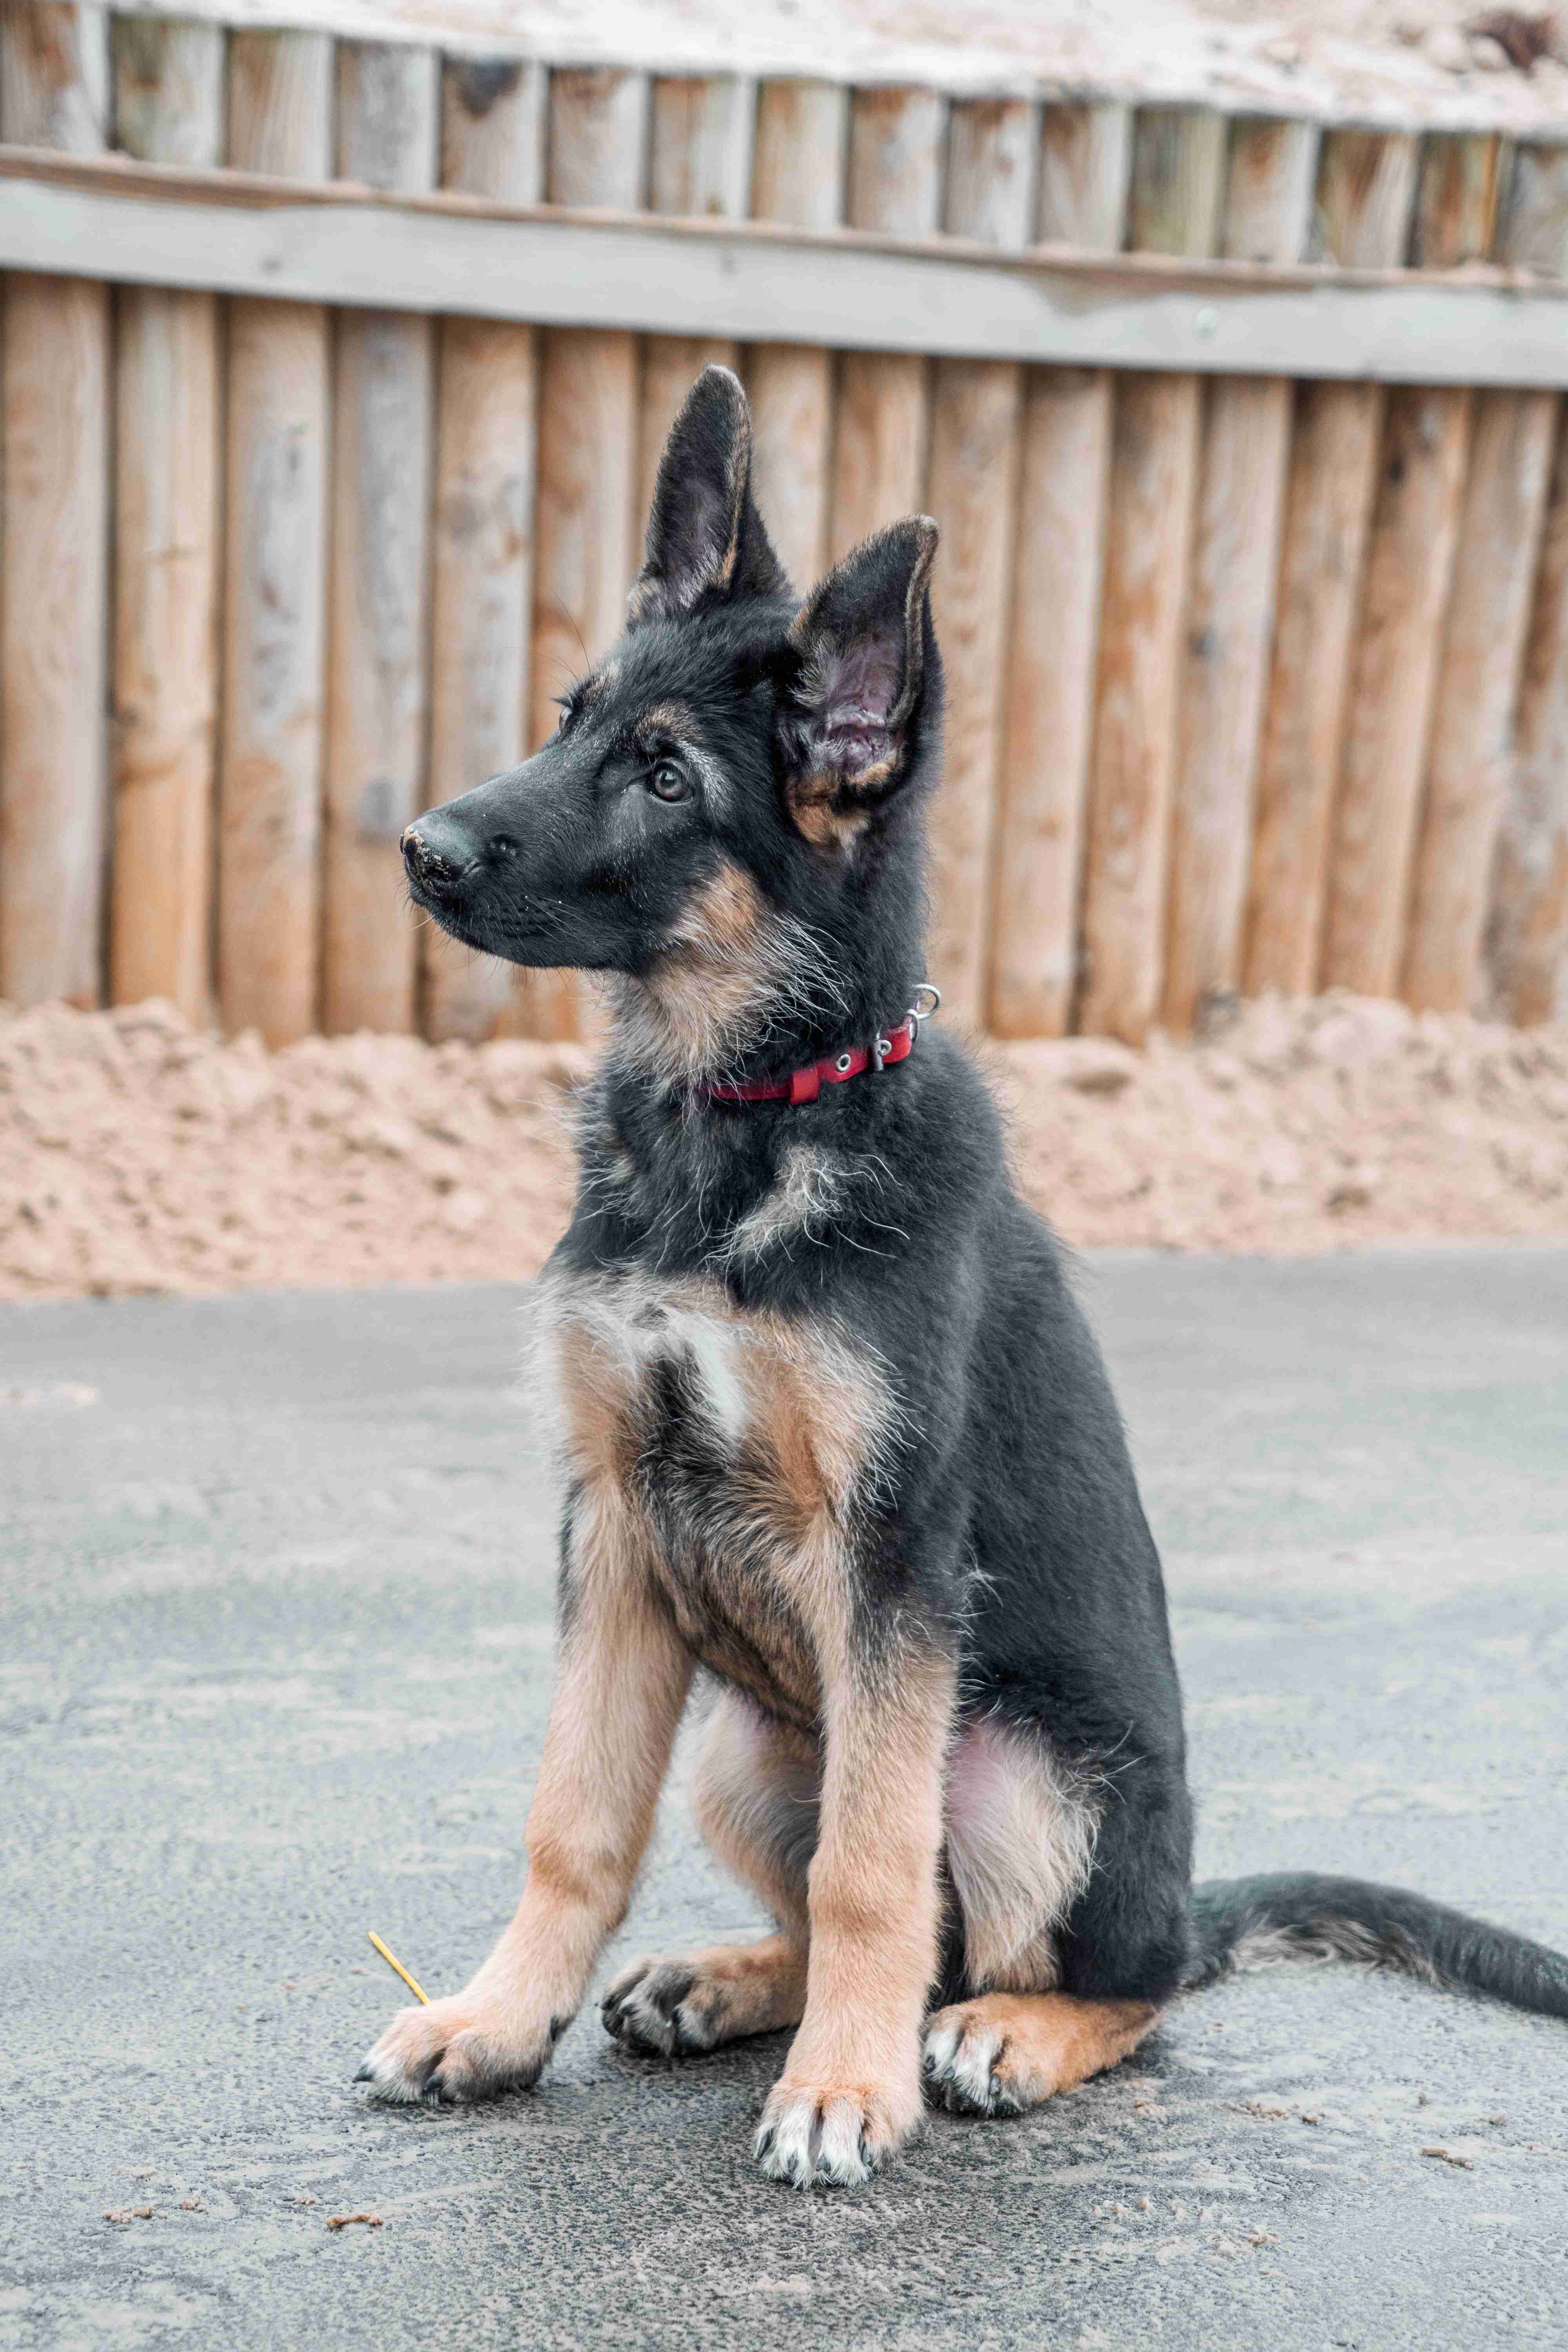 How often should you feed a German Shepherd puppy during the first two weeks?